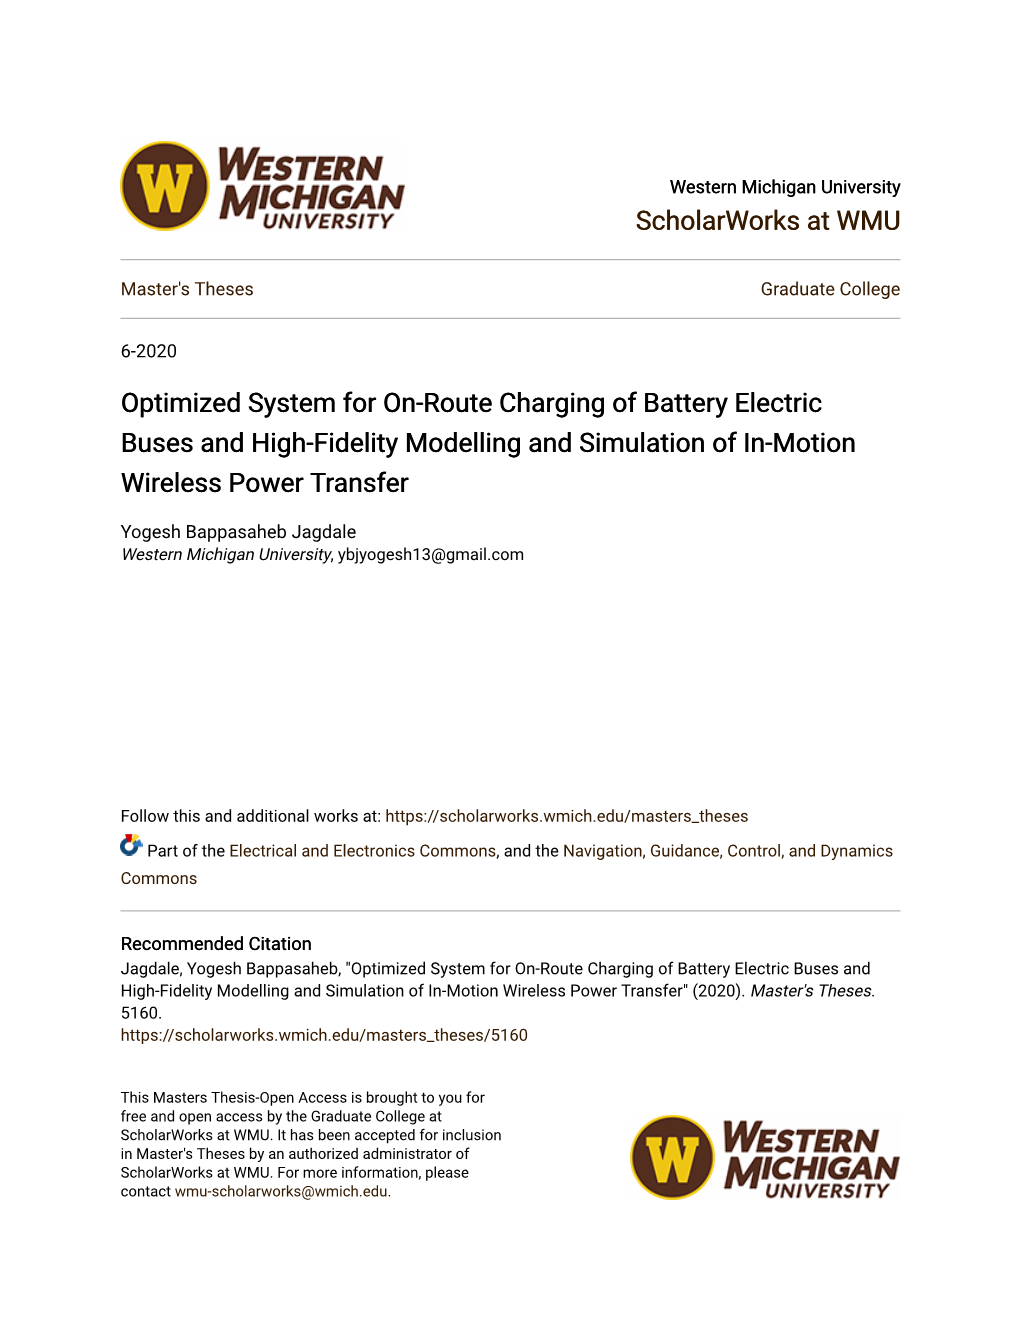 Optimized System for On-Route Charging of Battery Electric Buses and High-Fidelity Modelling and Simulation of In-Motion Wireless Power Transfer